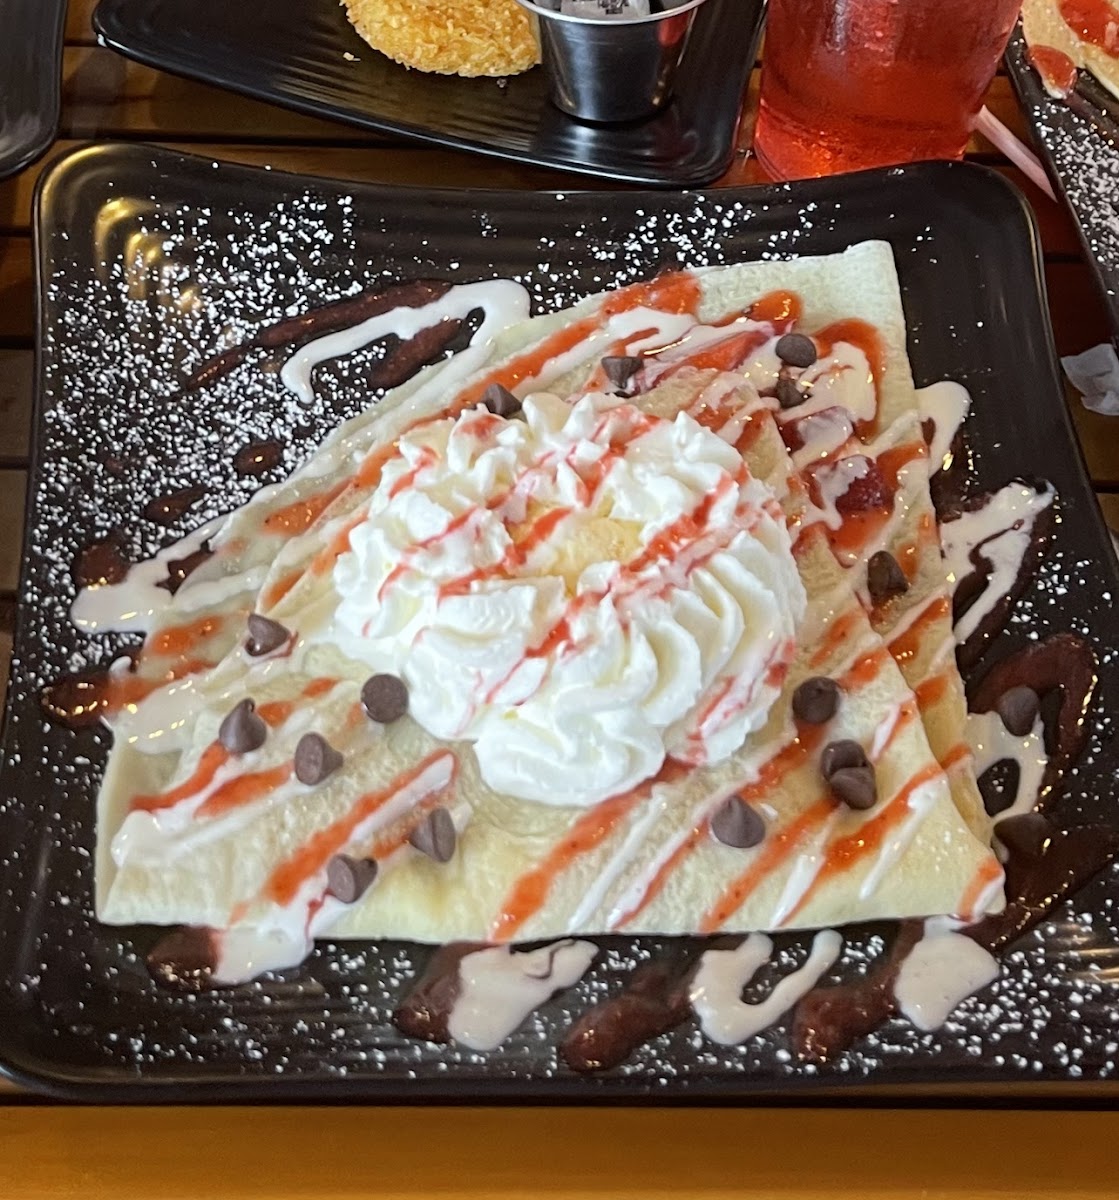 This was my gluten free crepe and it was PHENOMENAL. So good and such a good atmosphere!!